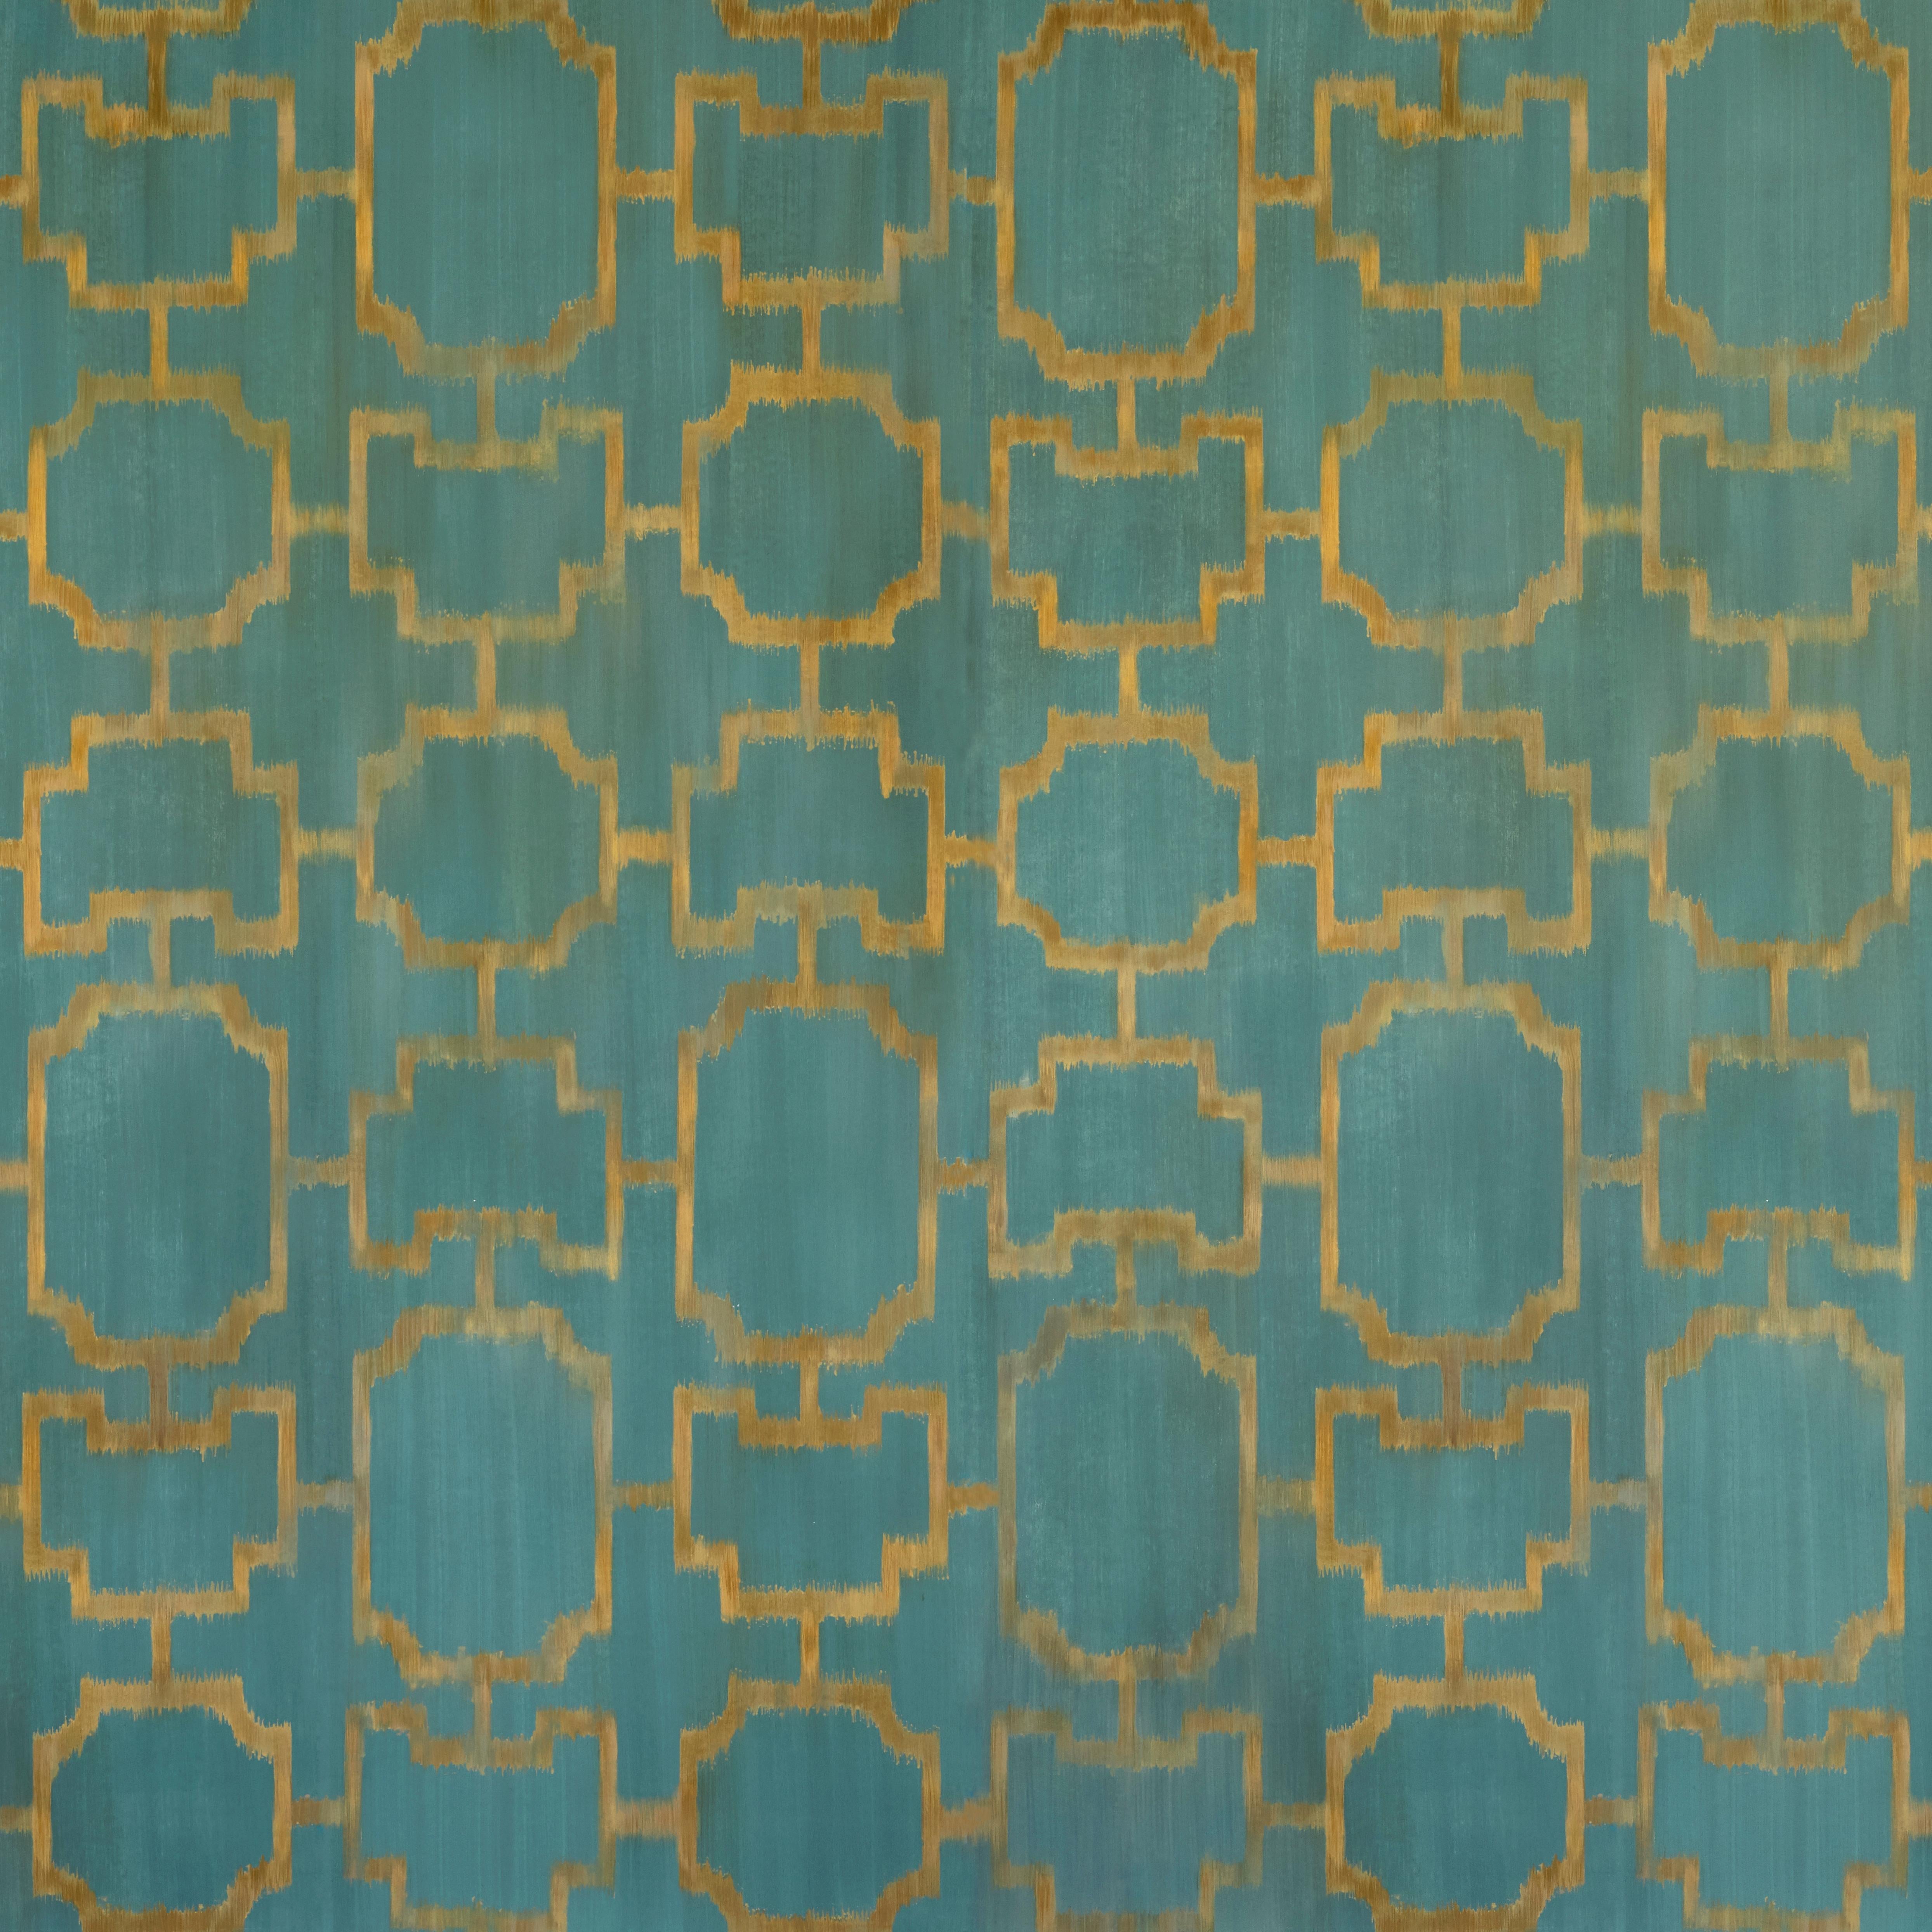 Hand-Painted Chain Pattern, Hand Painted Wallpaper - Made in Italy - customizable